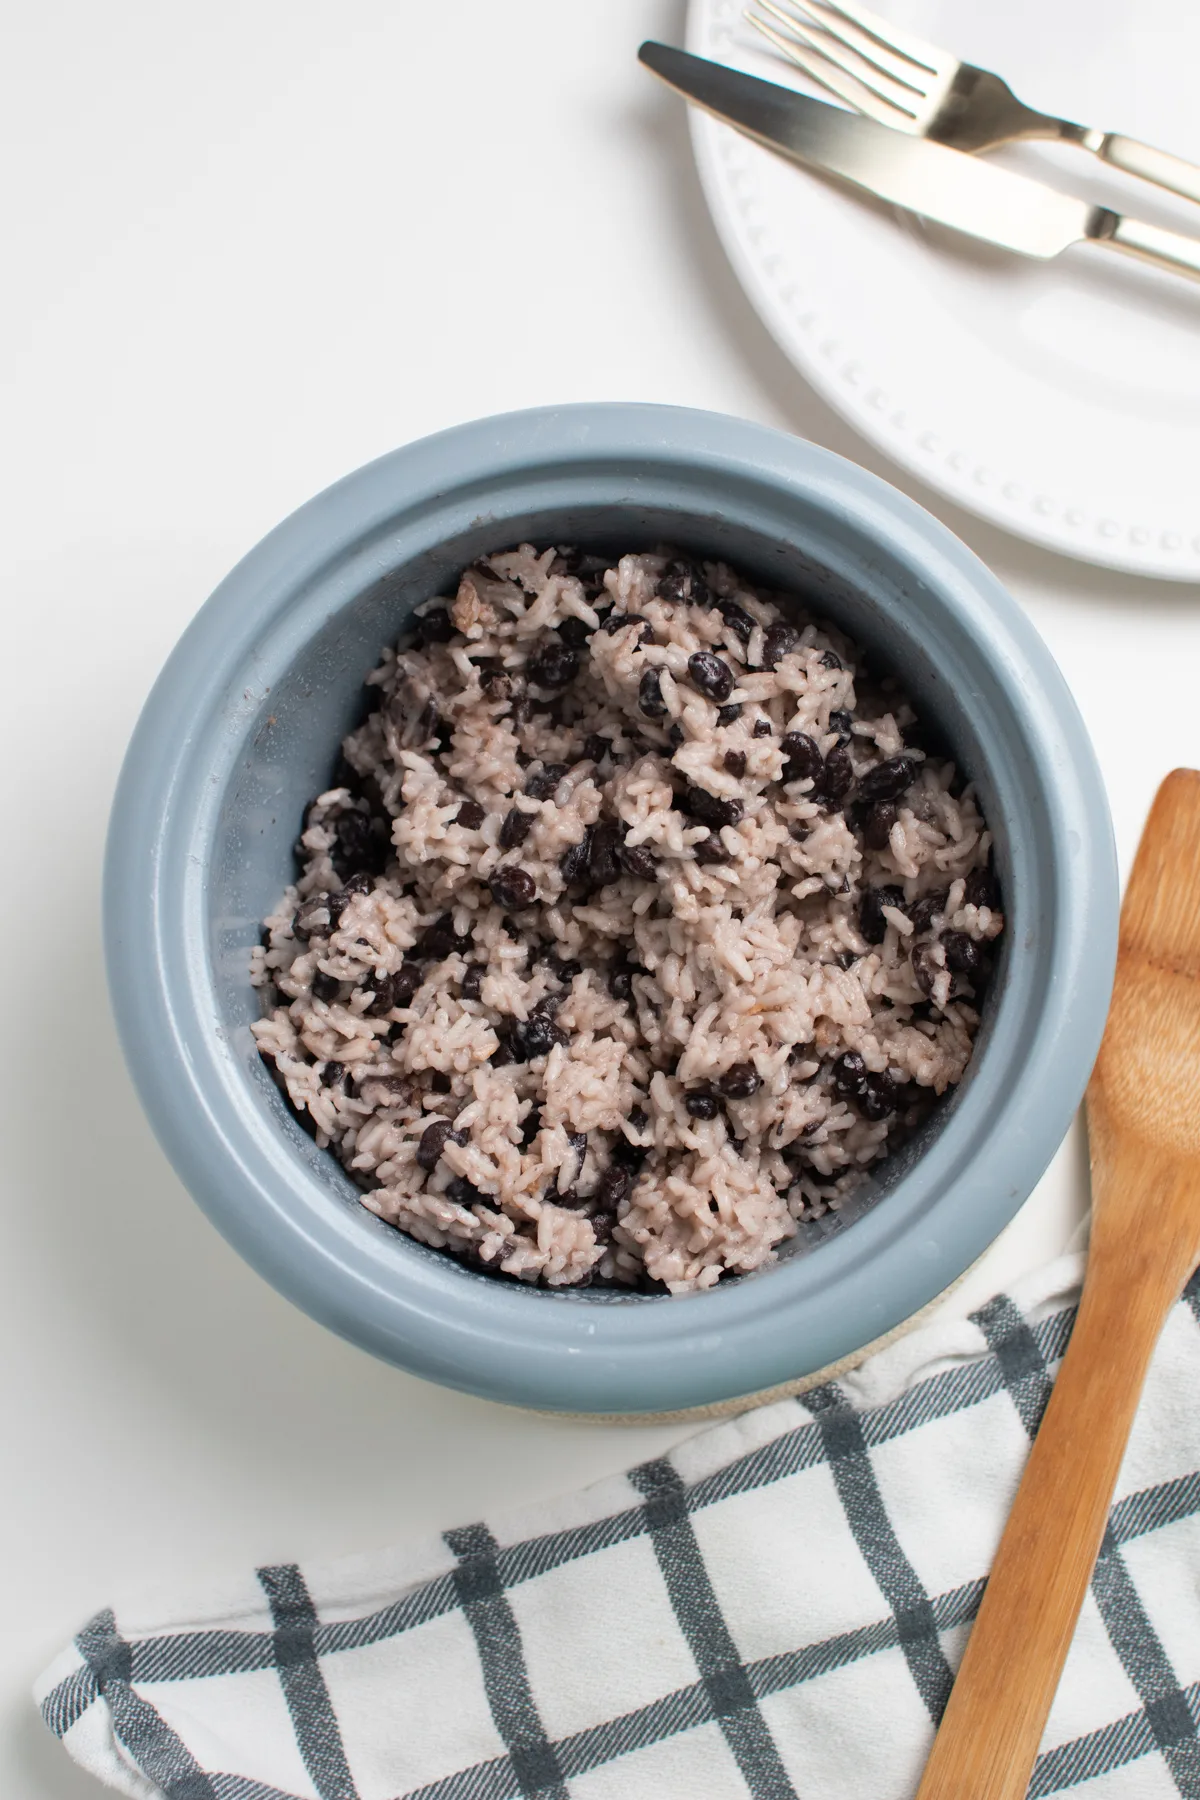 Coconut rice with black beans in rice cooker with blue rim and kitchen towel.